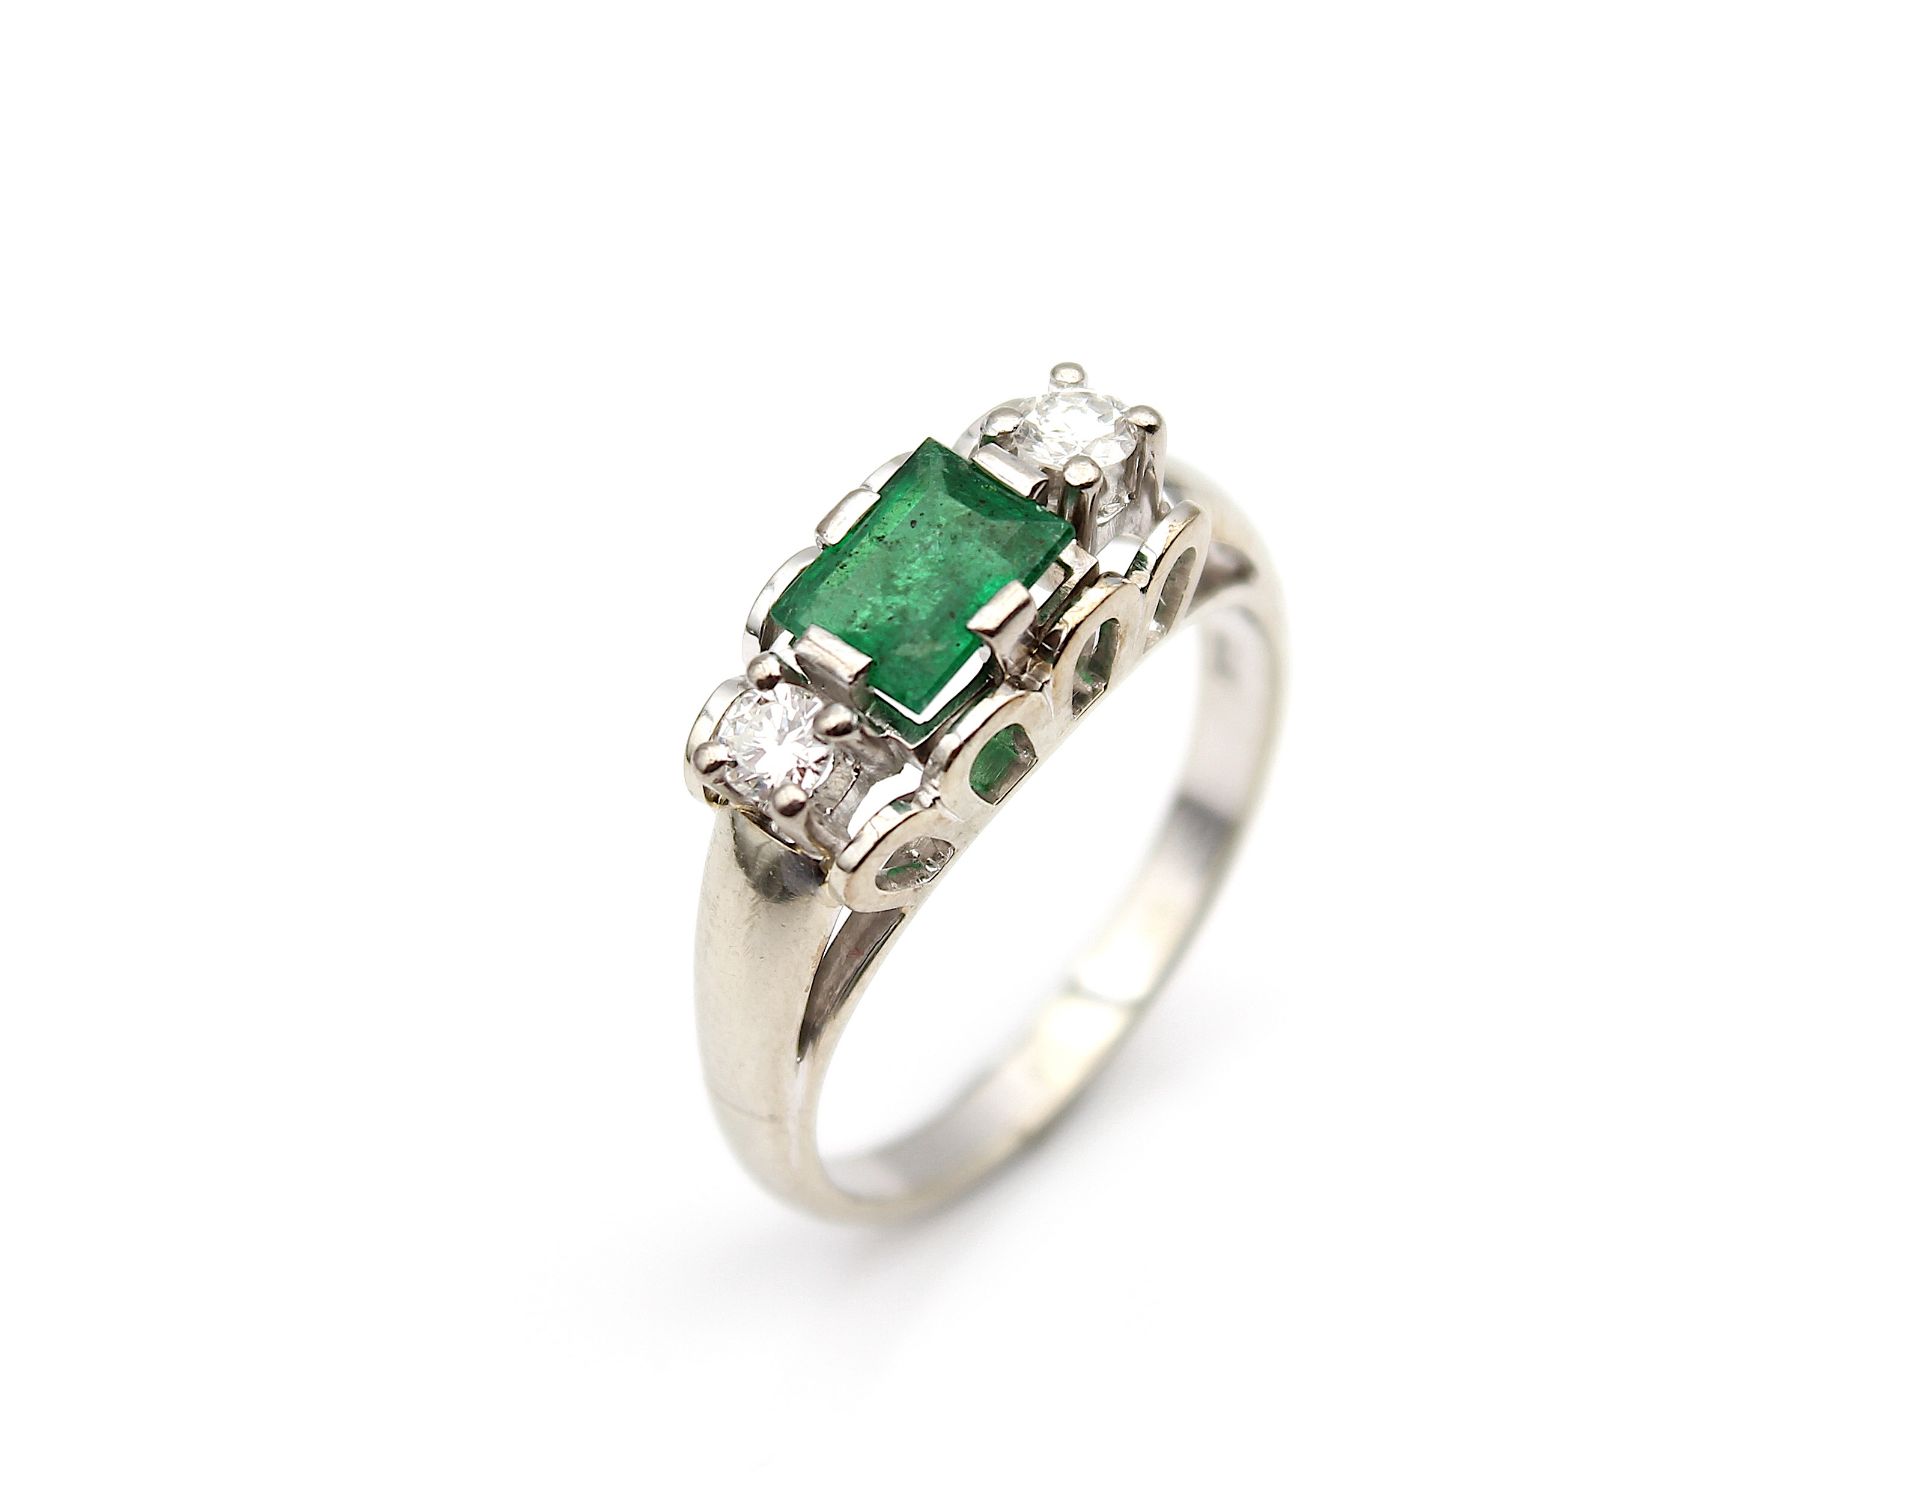 Classic ring with emerald and brilliants